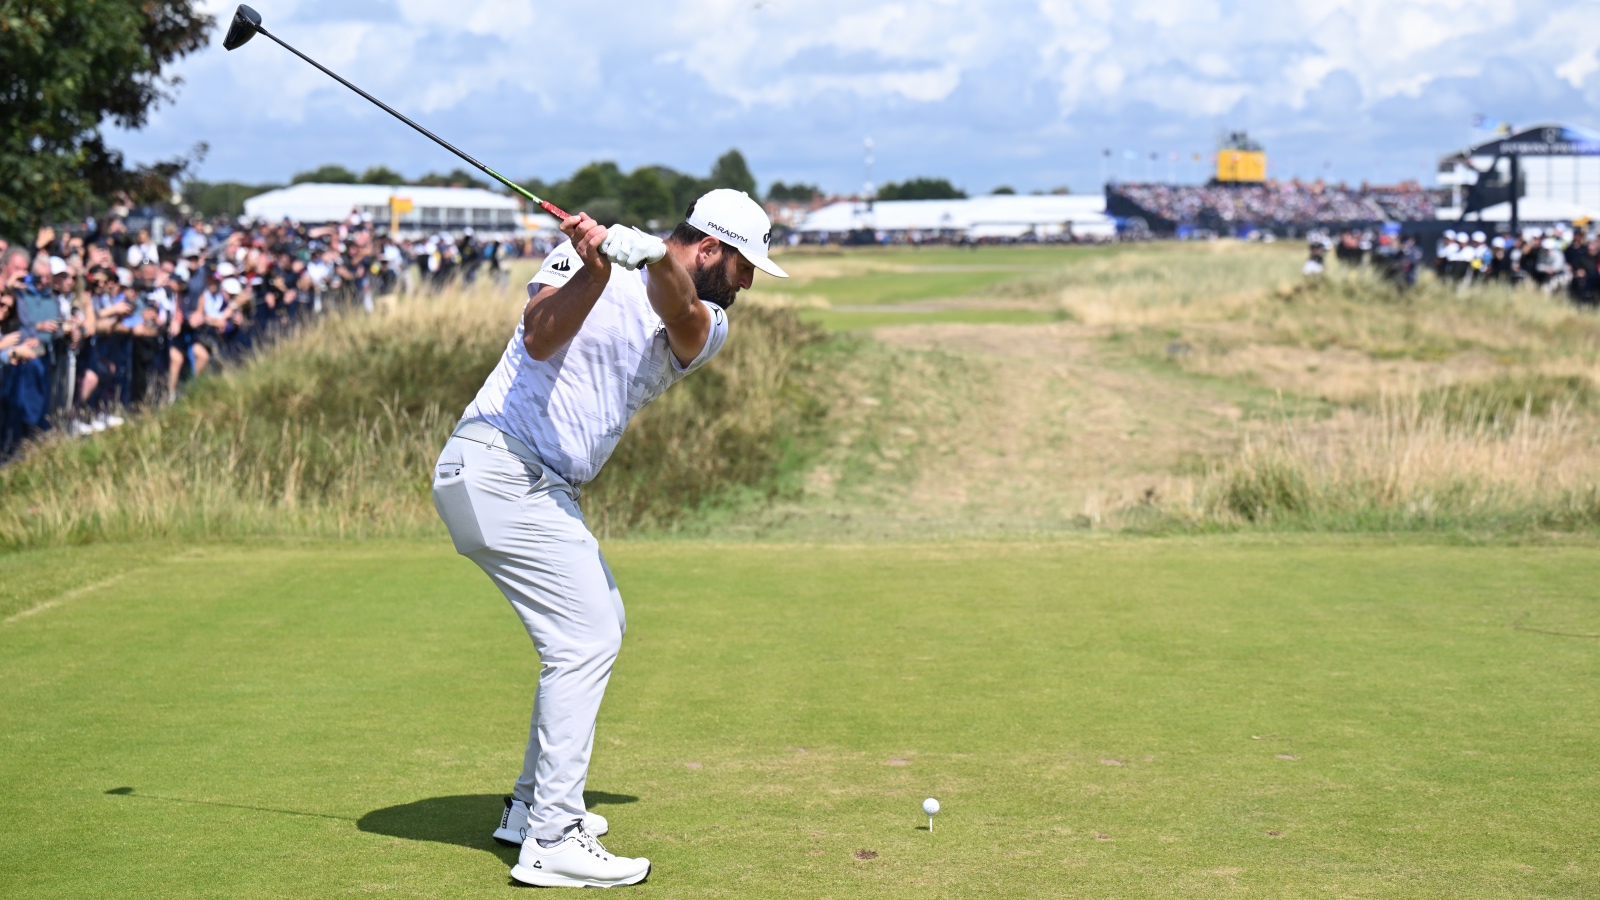 Jon Rahm teeing off at the Open Championship at Royal Liverpool Golf Club